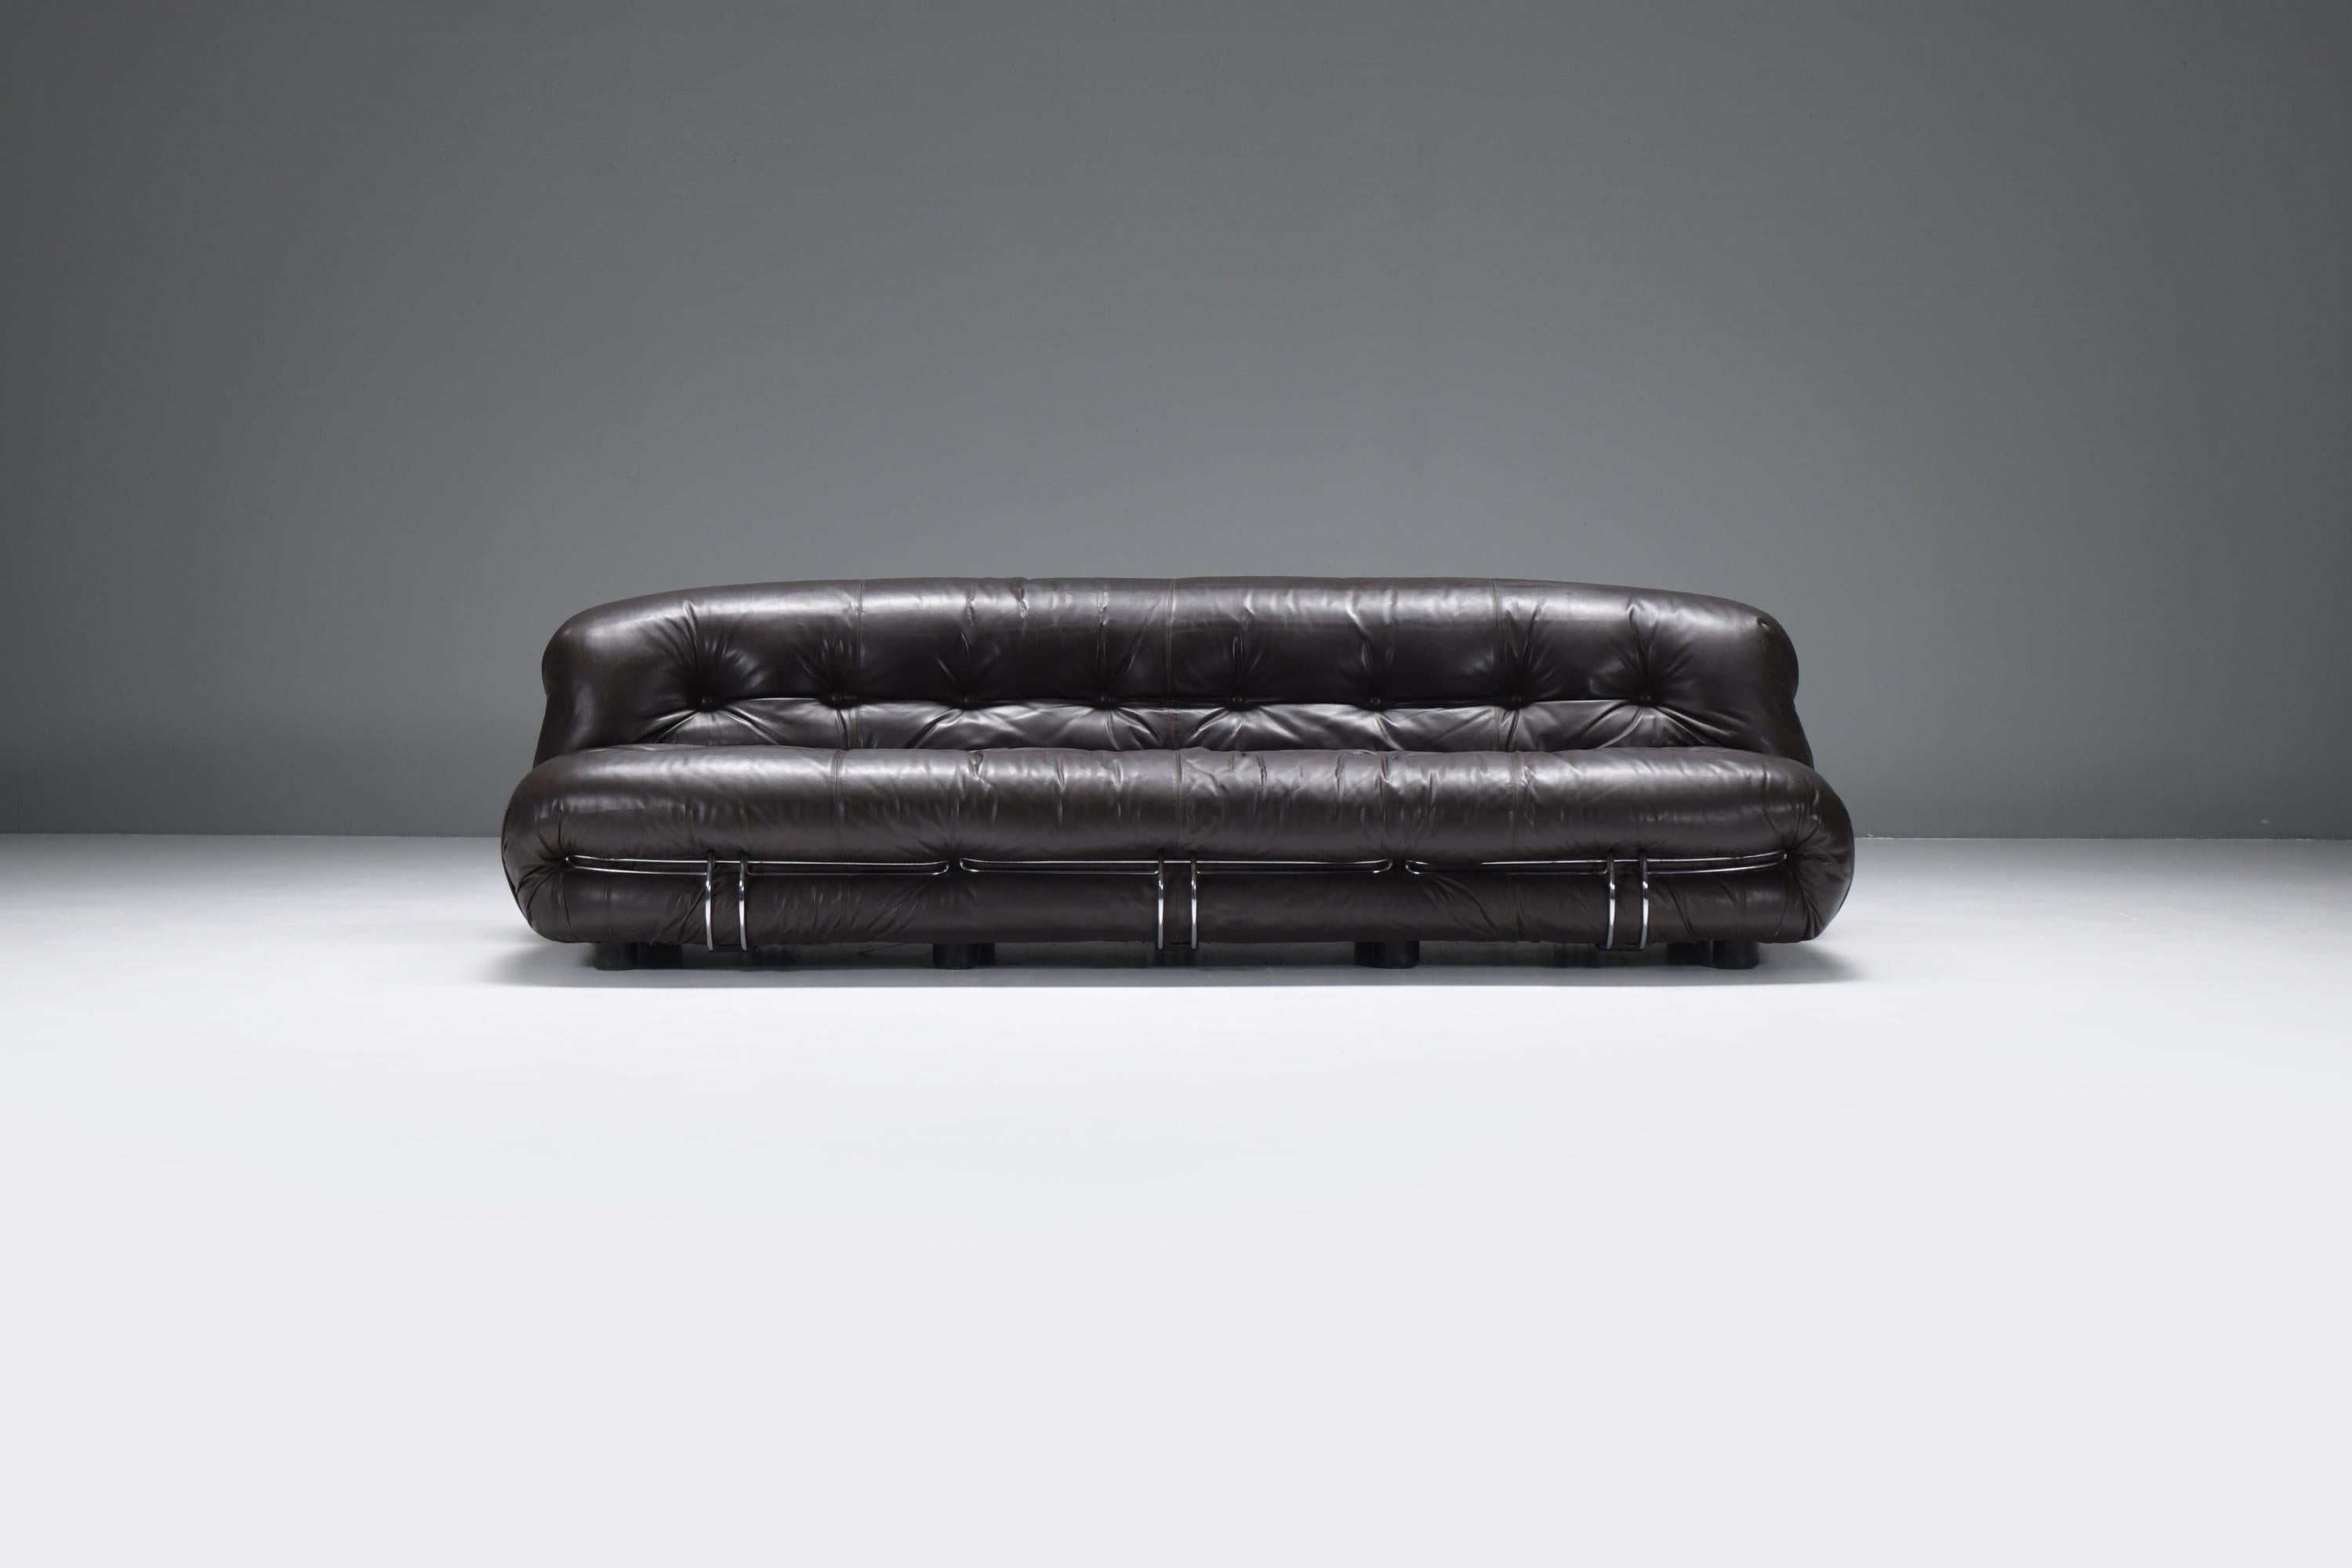 Stunning Vintage Soriana 3/4 seater in original dark brown leather.  Signed.
Designed by Afra e Tobia Scarpa for Cassina, Italy, 1970s 

The Soriana series was meant to express beauty and comfort by using a whole bundle of leather held by a